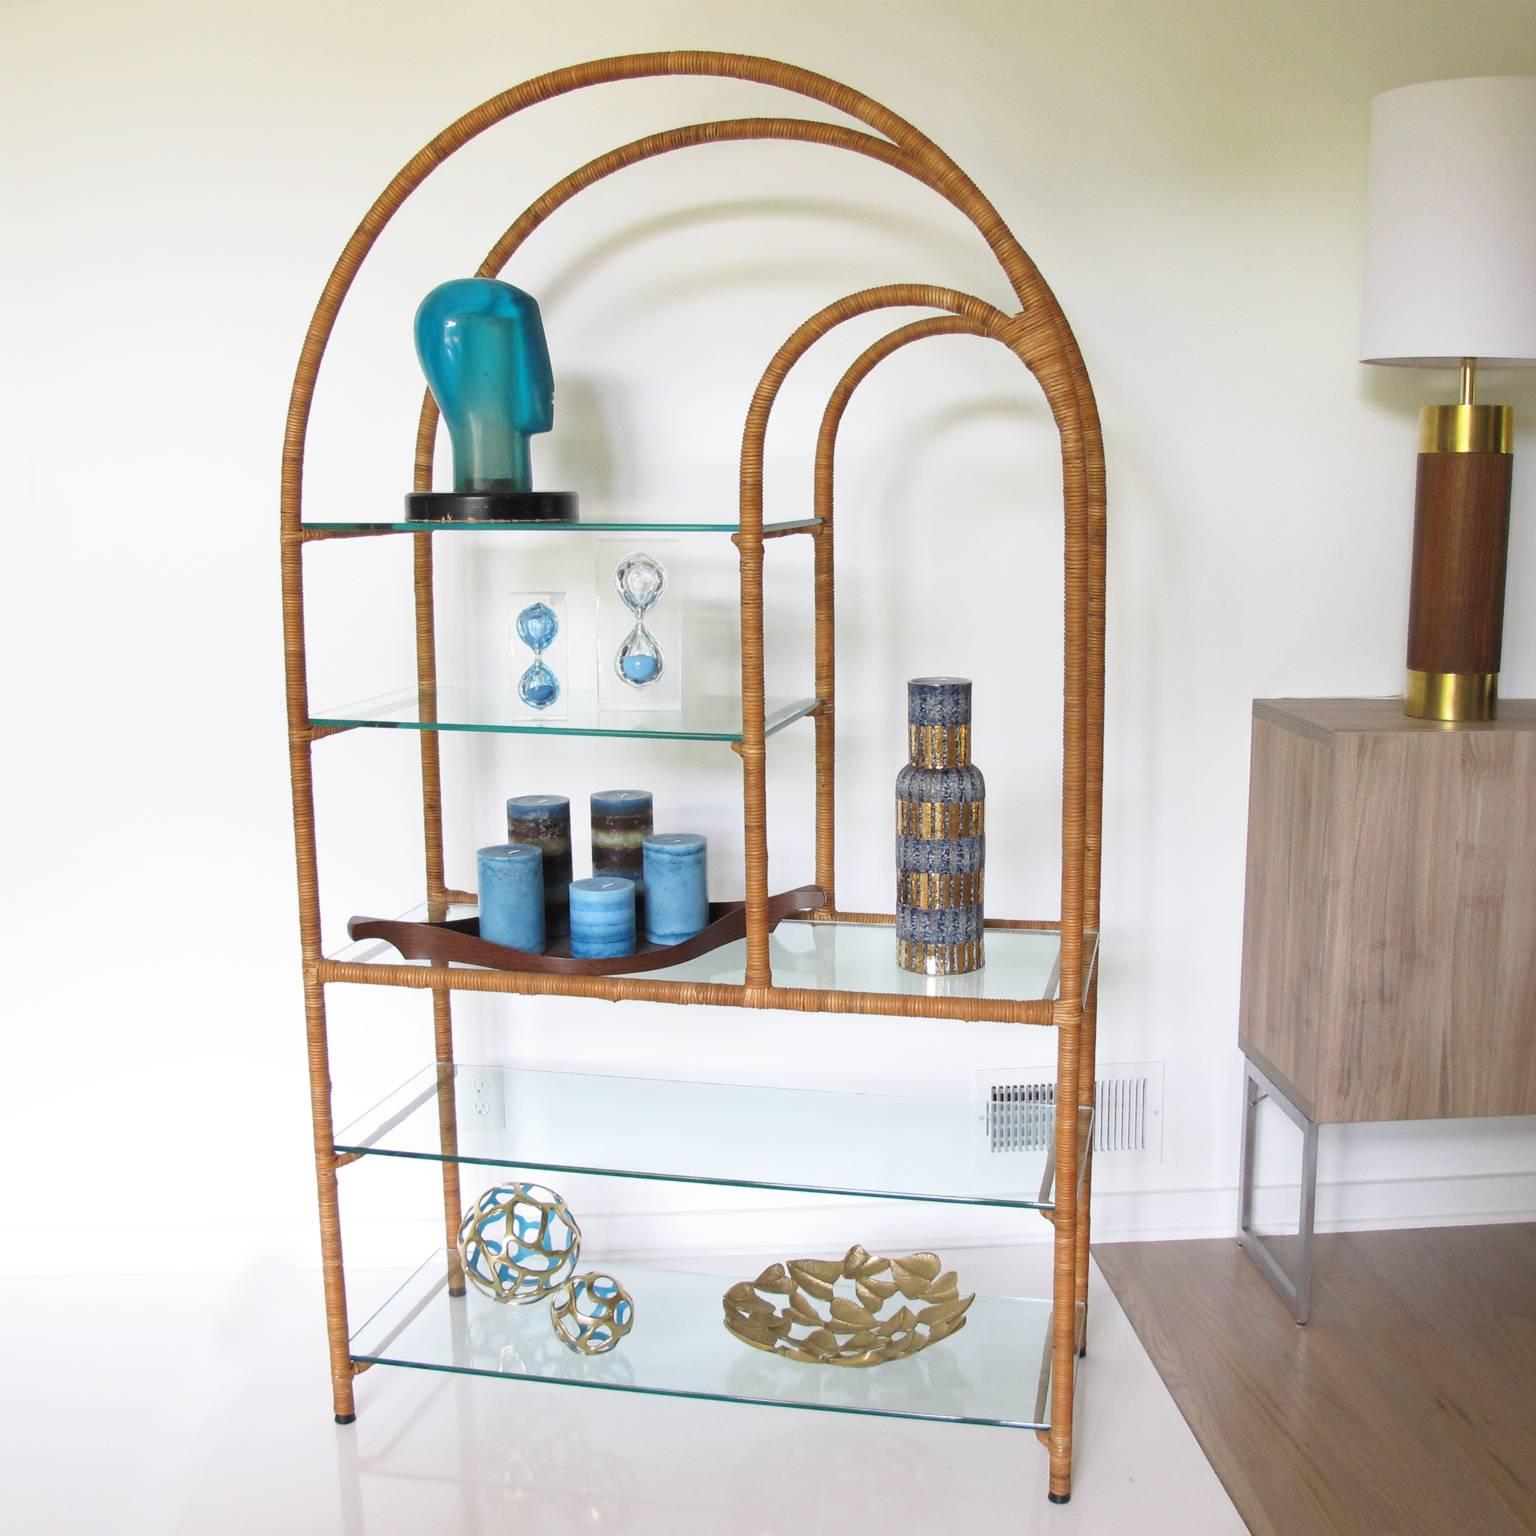 Hollywood Regency Milo Baughman Style Mid-Century Modern Rattan and Glass Etagere Bookcase